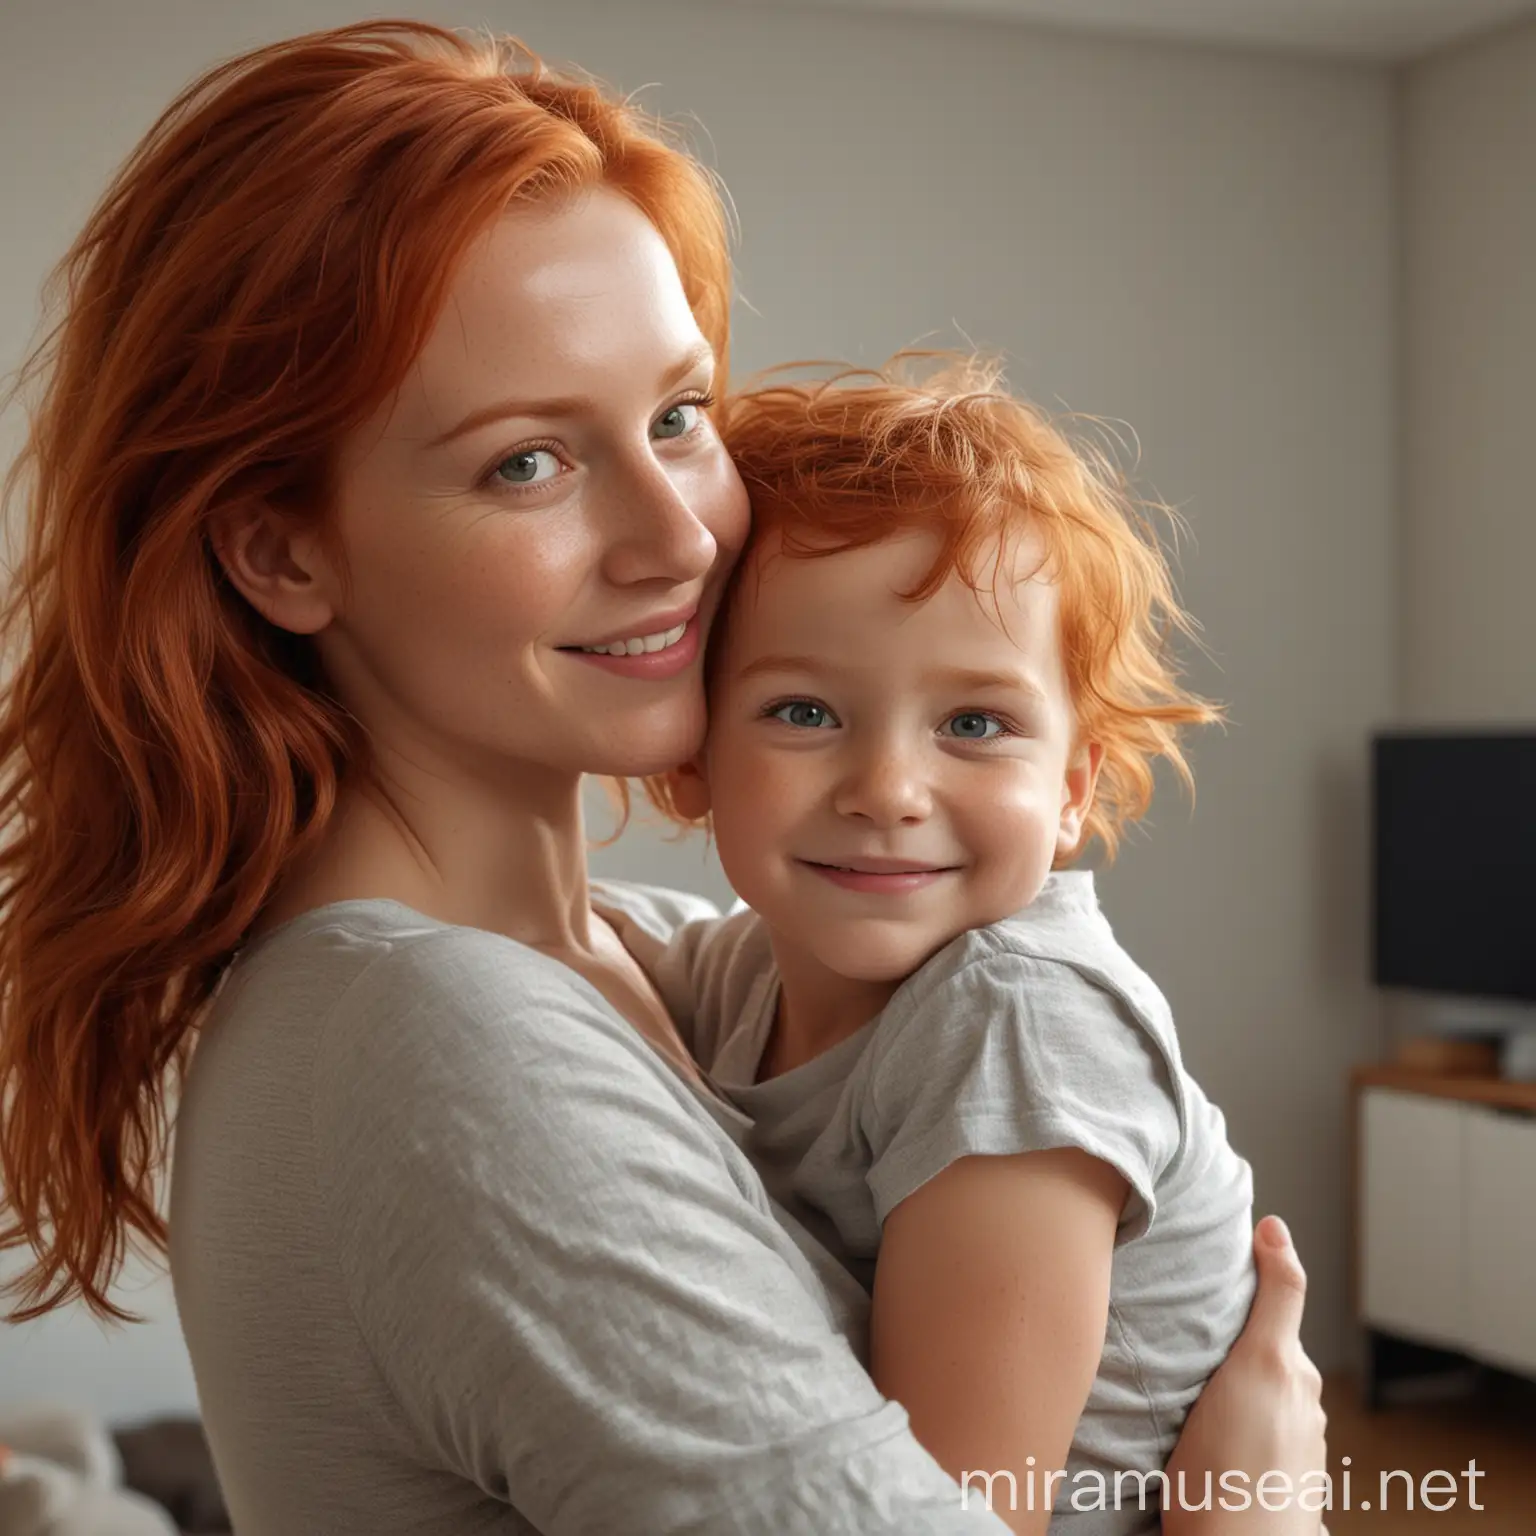 RedHaired Mother Smiling with Child in Arms in Perfectly Lit Apartment